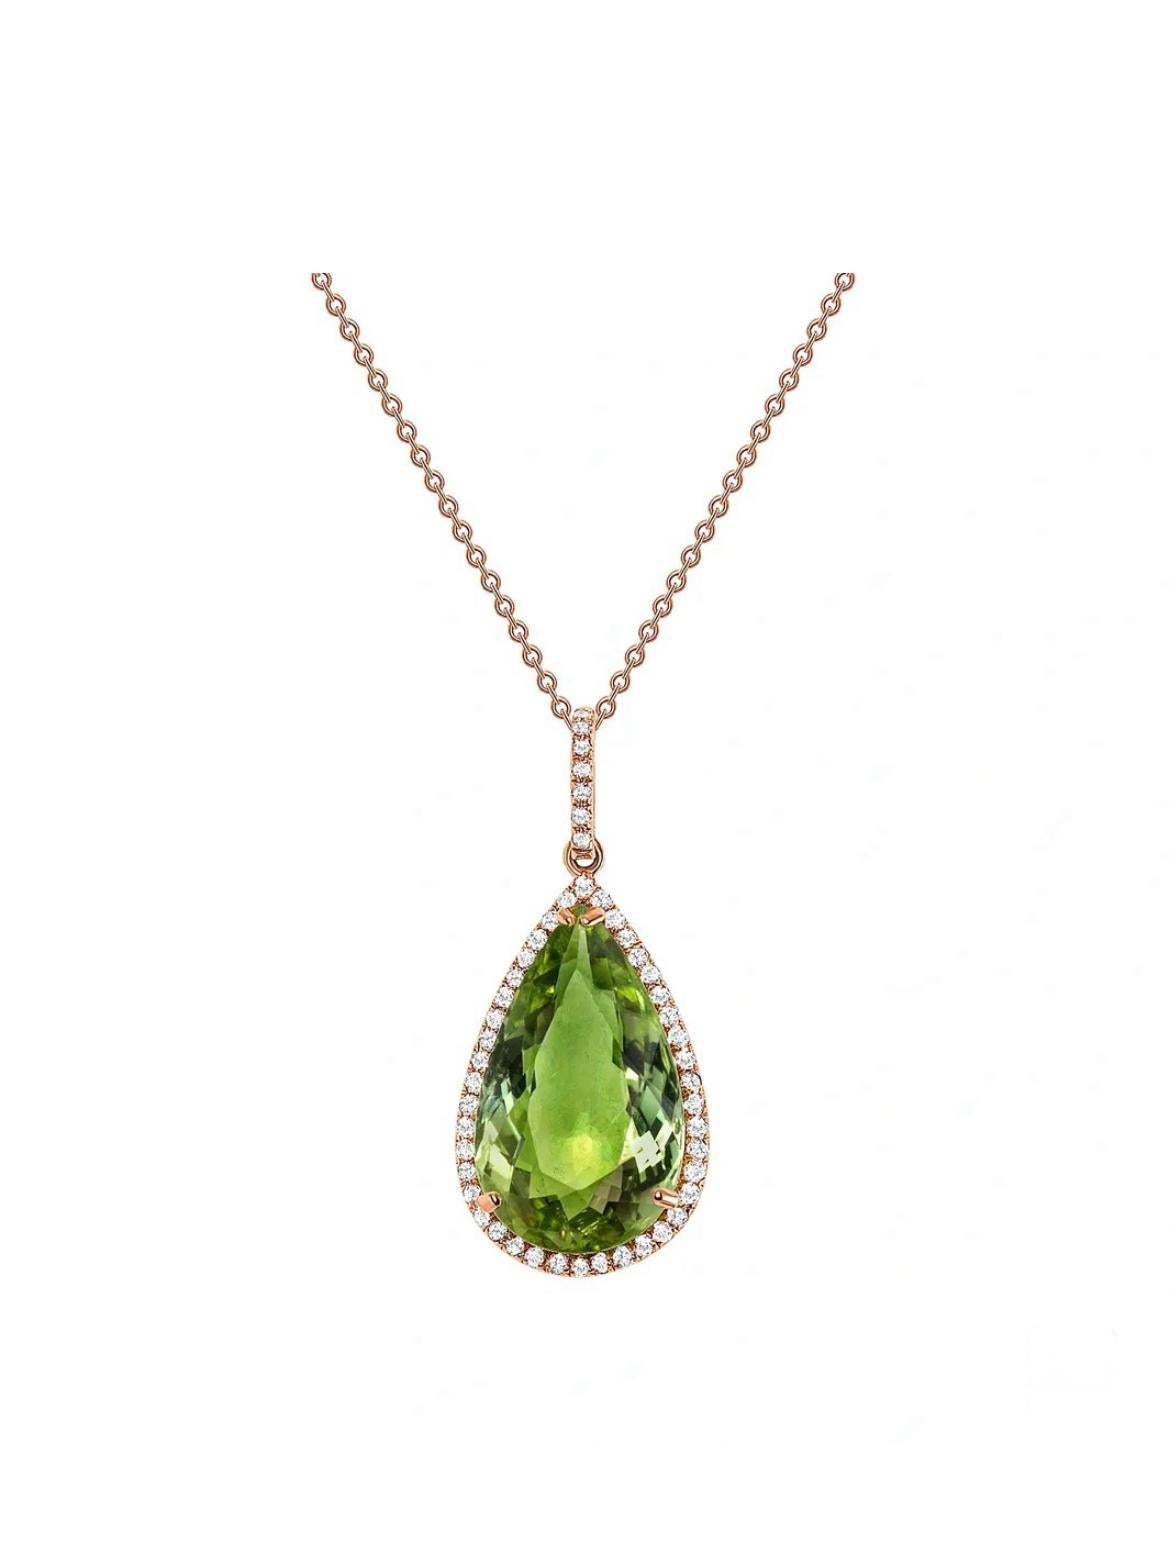 A splendid 7.32-carat untreated green Tourmaline from Mozambique takes the limelight with round shimmering diamonds totaling 0.27cts in this beauteous 18K yellow gold pendant. GIA certified. 

This copper and manganese bearing tourmaline may be